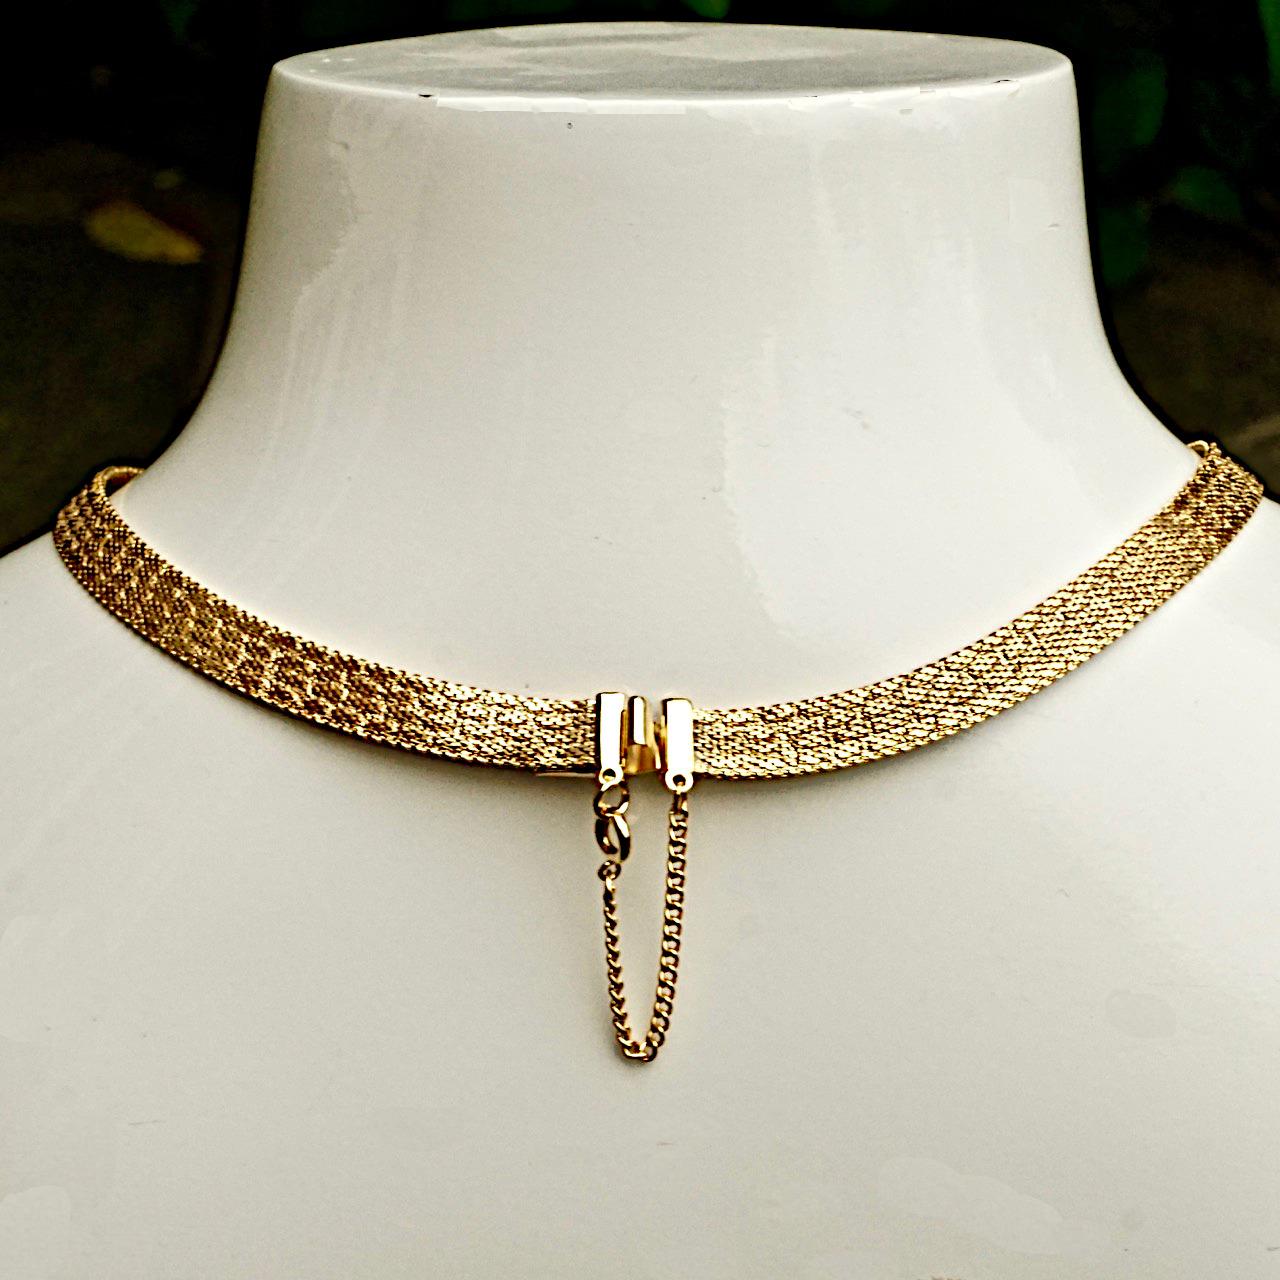 Women's or Men's Gold Plated Textured Design Mesh Collar Necklace circa 1980s For Sale